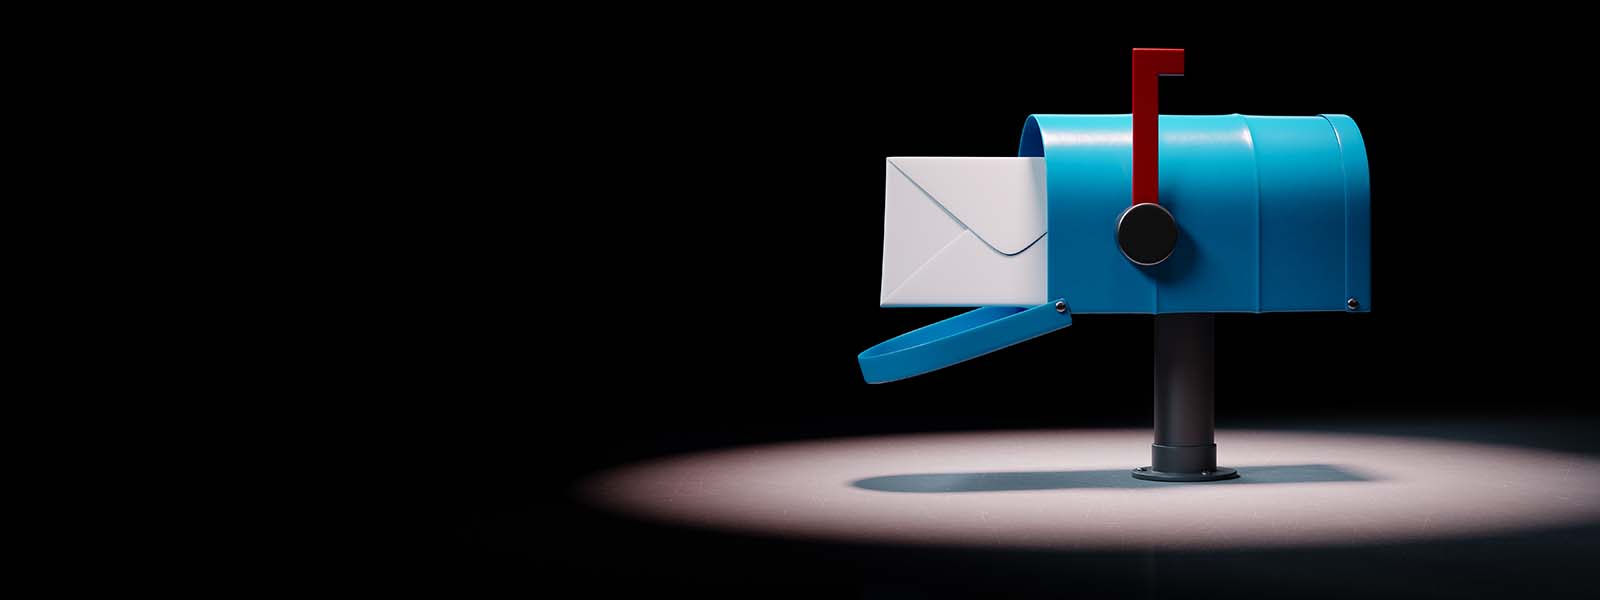 Blue Mailbox with Envelop Spotlighted on Black Background with Copy Space 3D Illustration